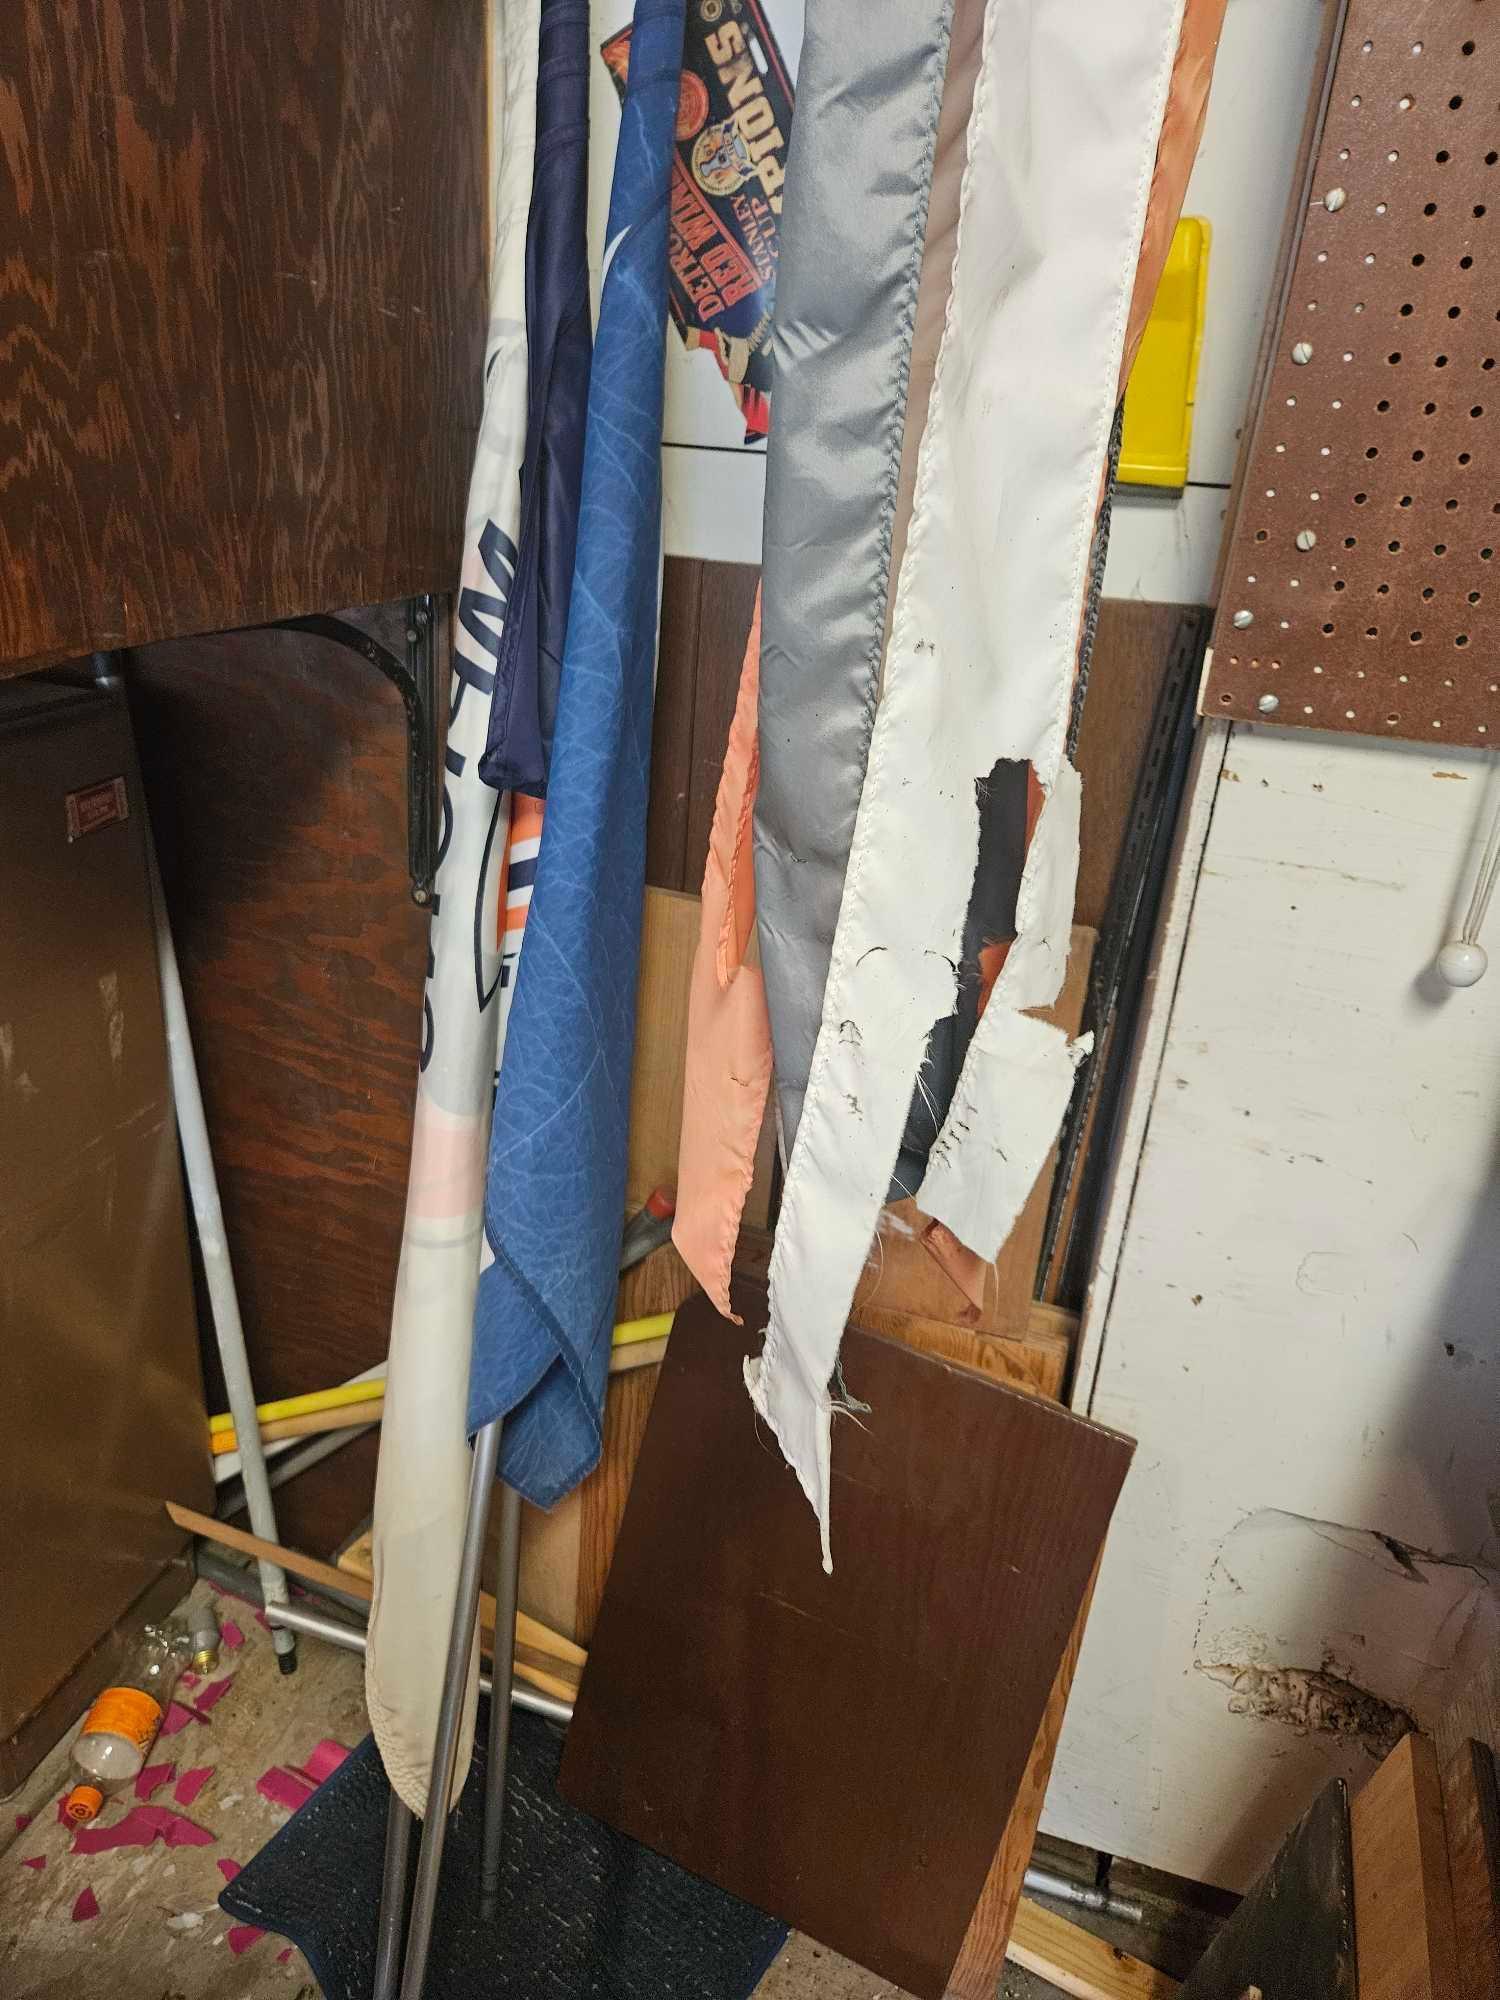 Cabinet contents including banners and vacuum cleaner on floor.